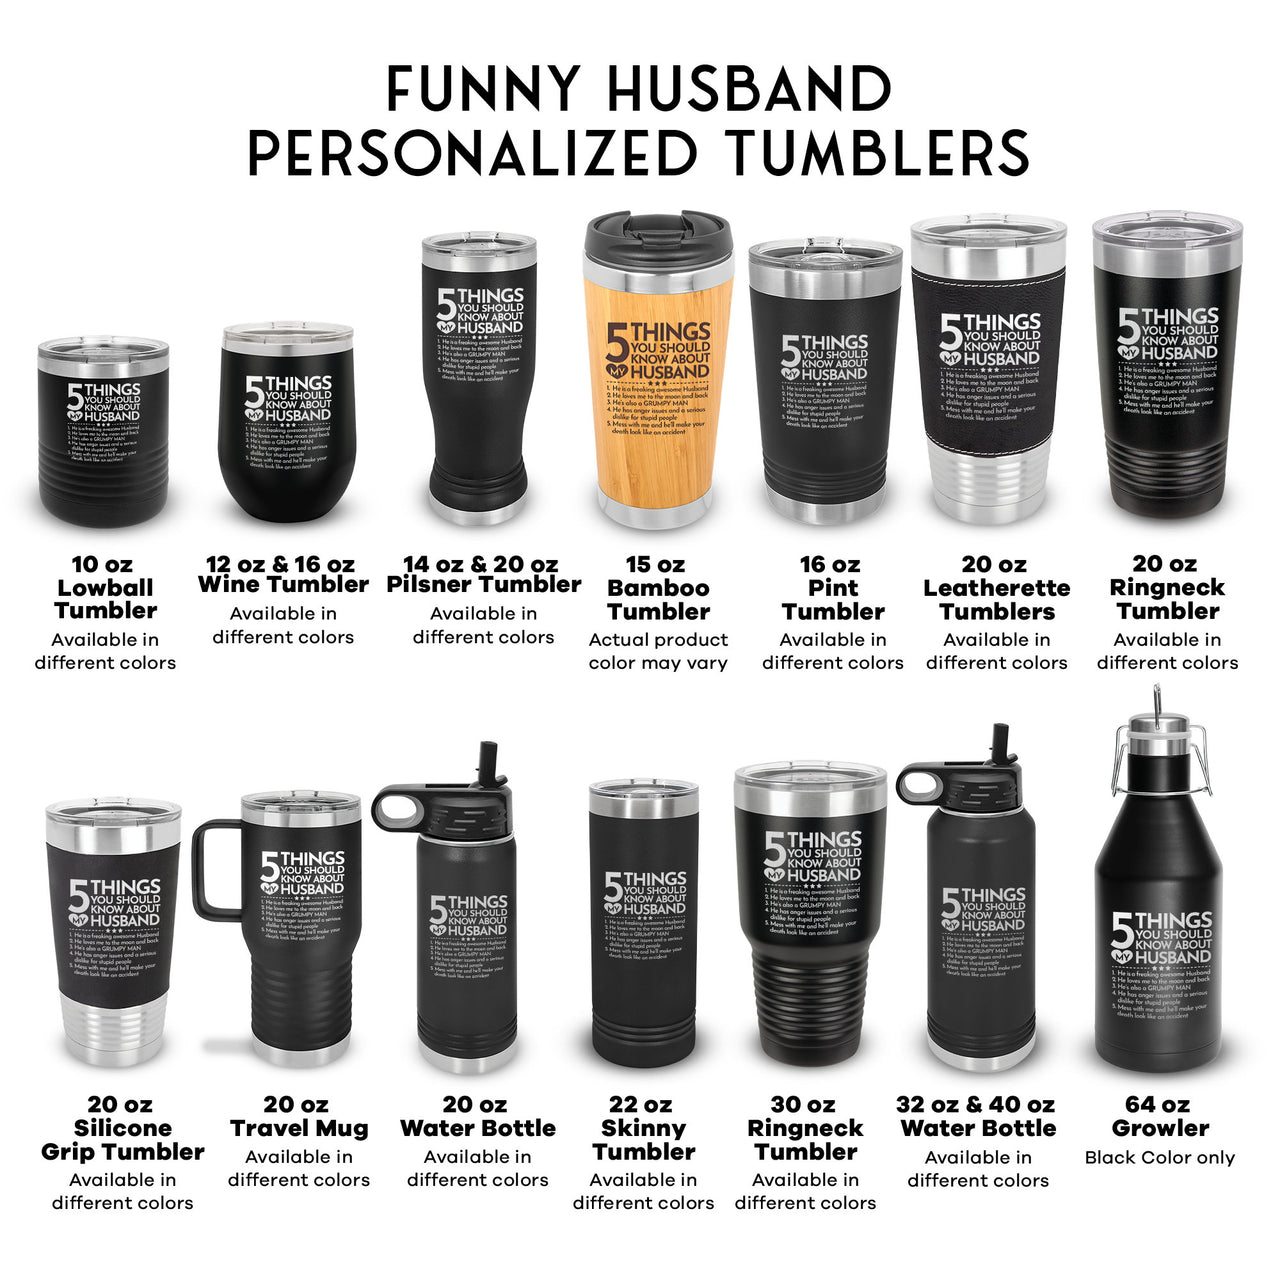 Man Gift, Funny Graphic 5 Things You Should Know About My Husband Tumbler, Engraved Tumbler, Travel Mug Gift for Husband, Cups Gifts for Him